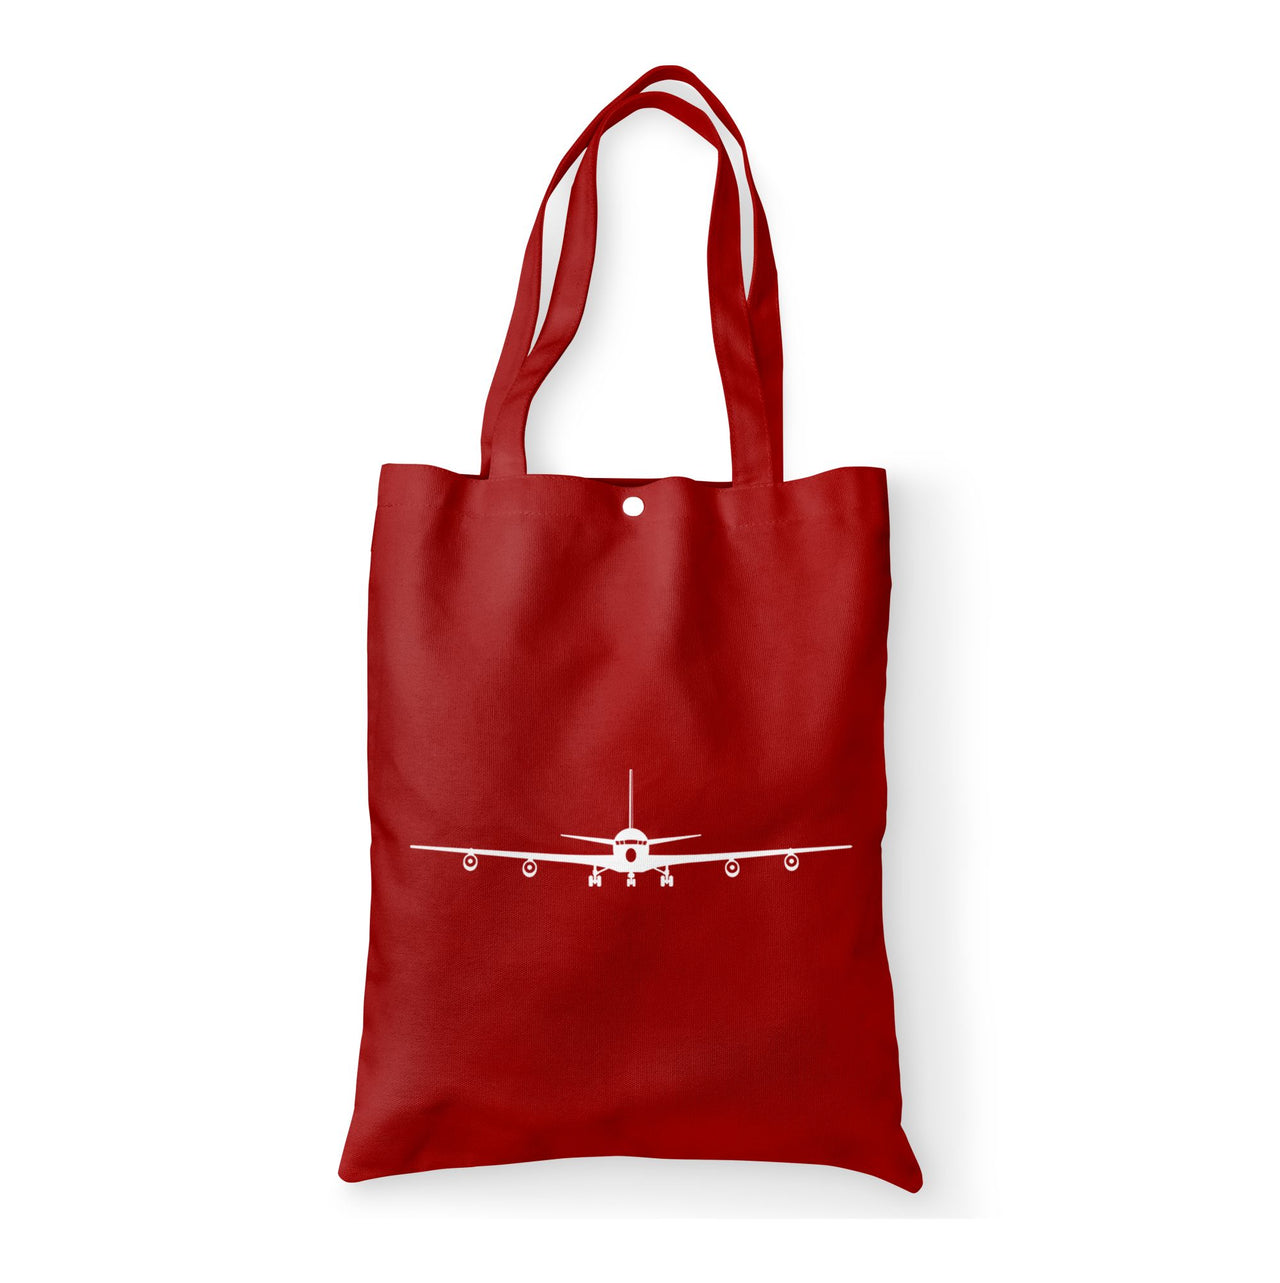 Boeing 707 Silhouette Designed Tote Bags